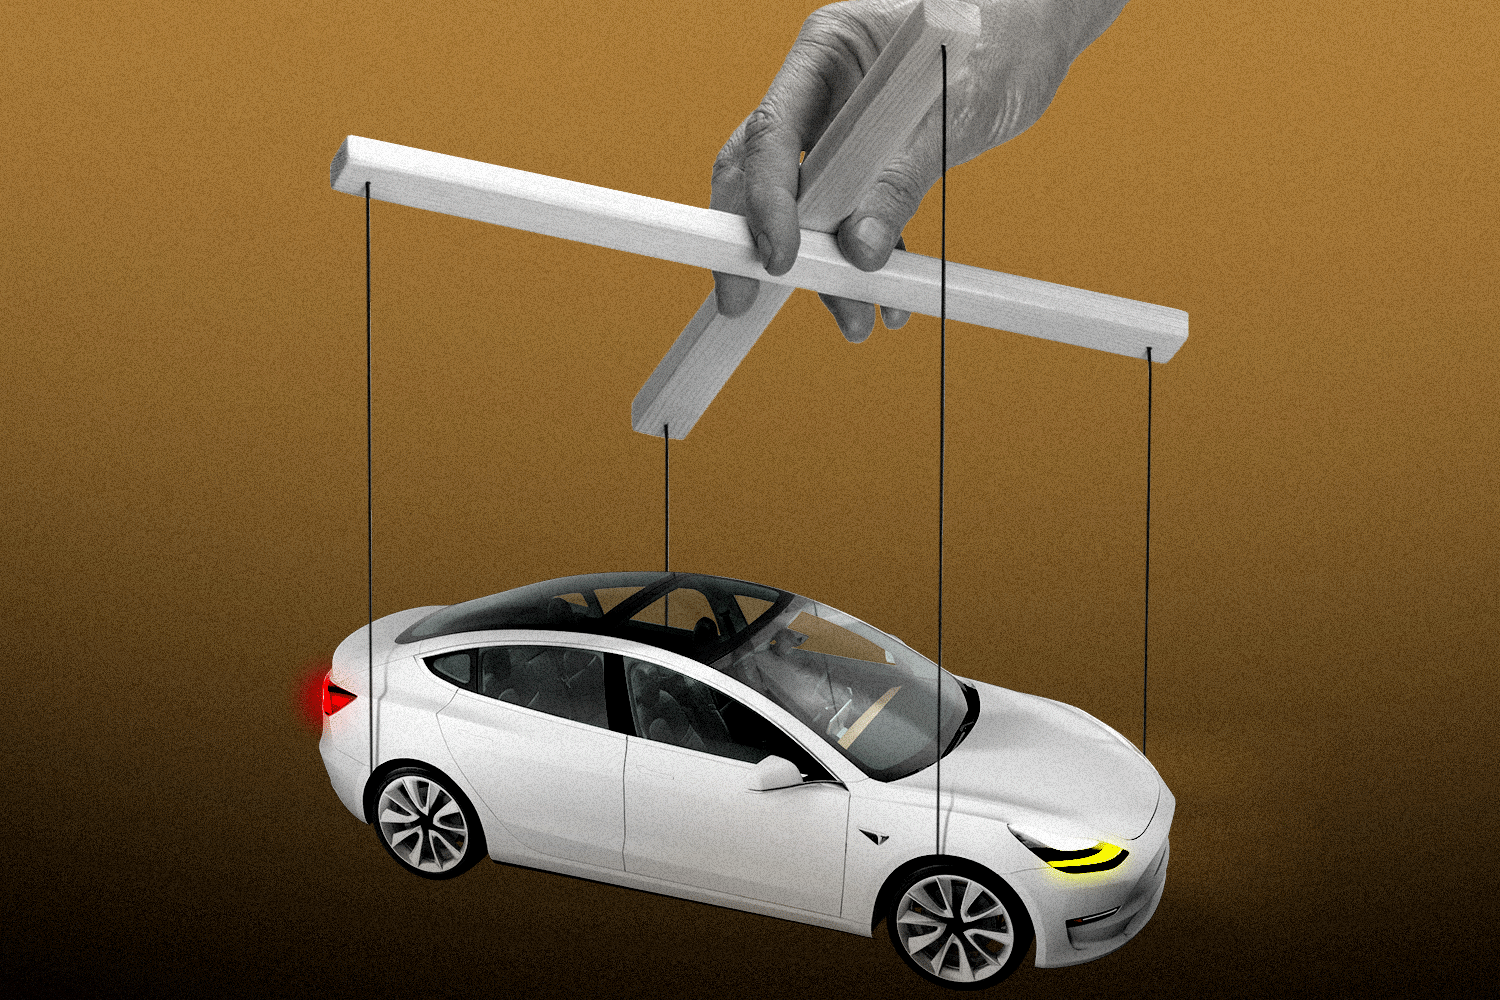 An electric vehicle dangling off of puppet strings held by a human hand